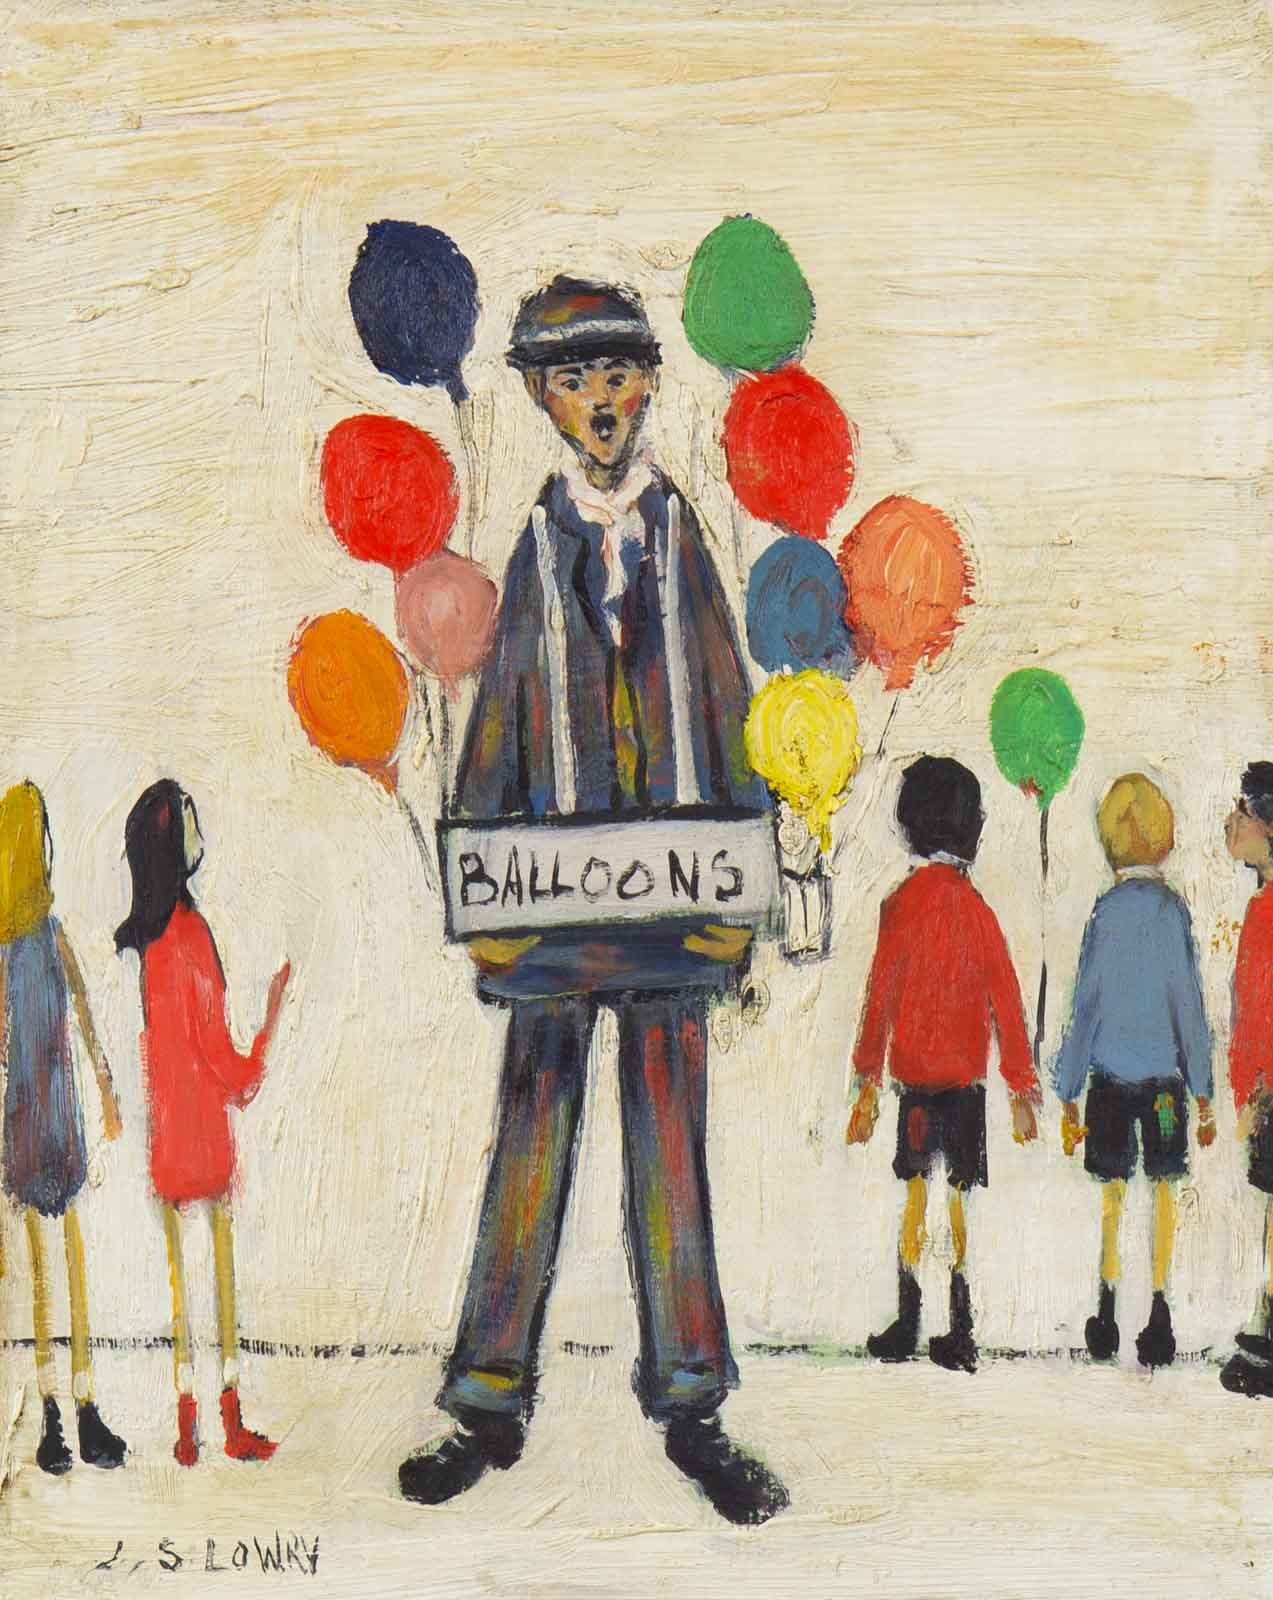 Balloon Seller after L.S.Lowry